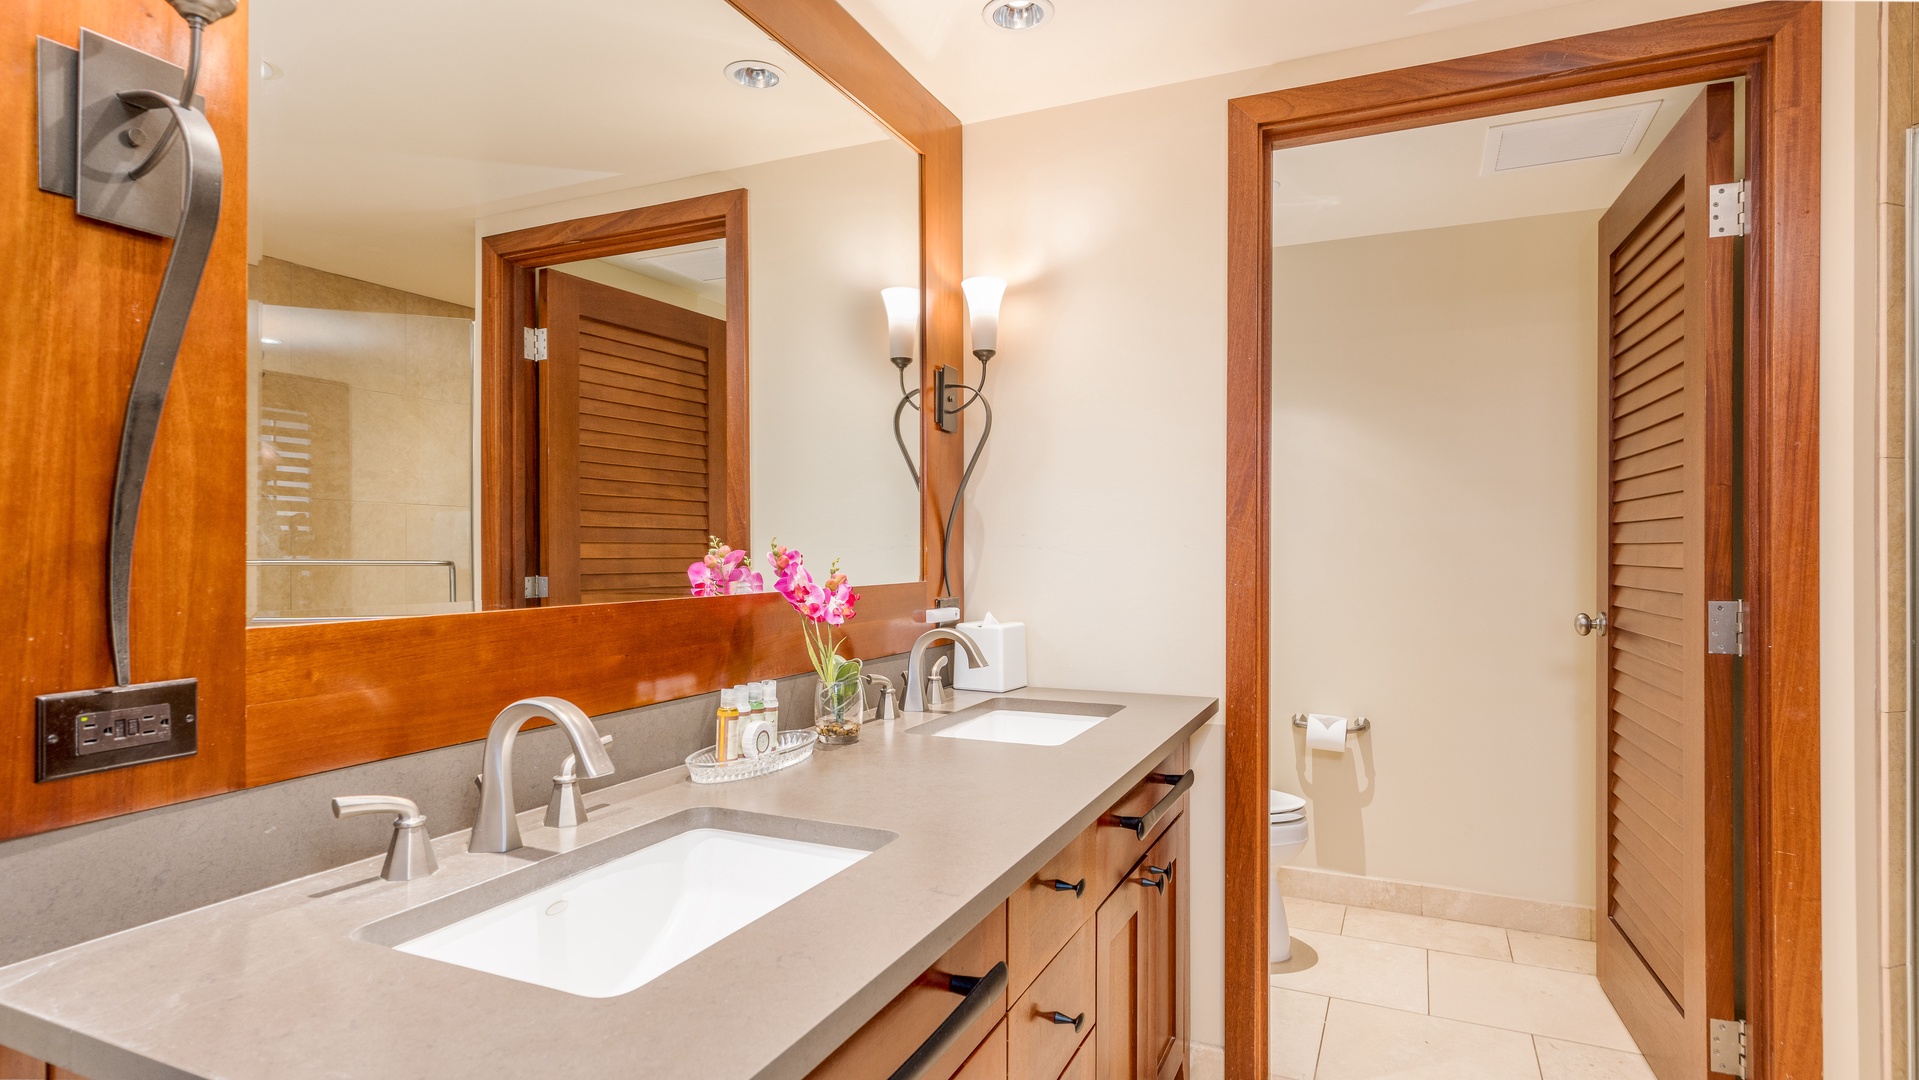 Kapolei Vacation Rentals, Ko Olina Beach Villas O305 - The primary guest bathroom featuring a double vanity and ample lighting.